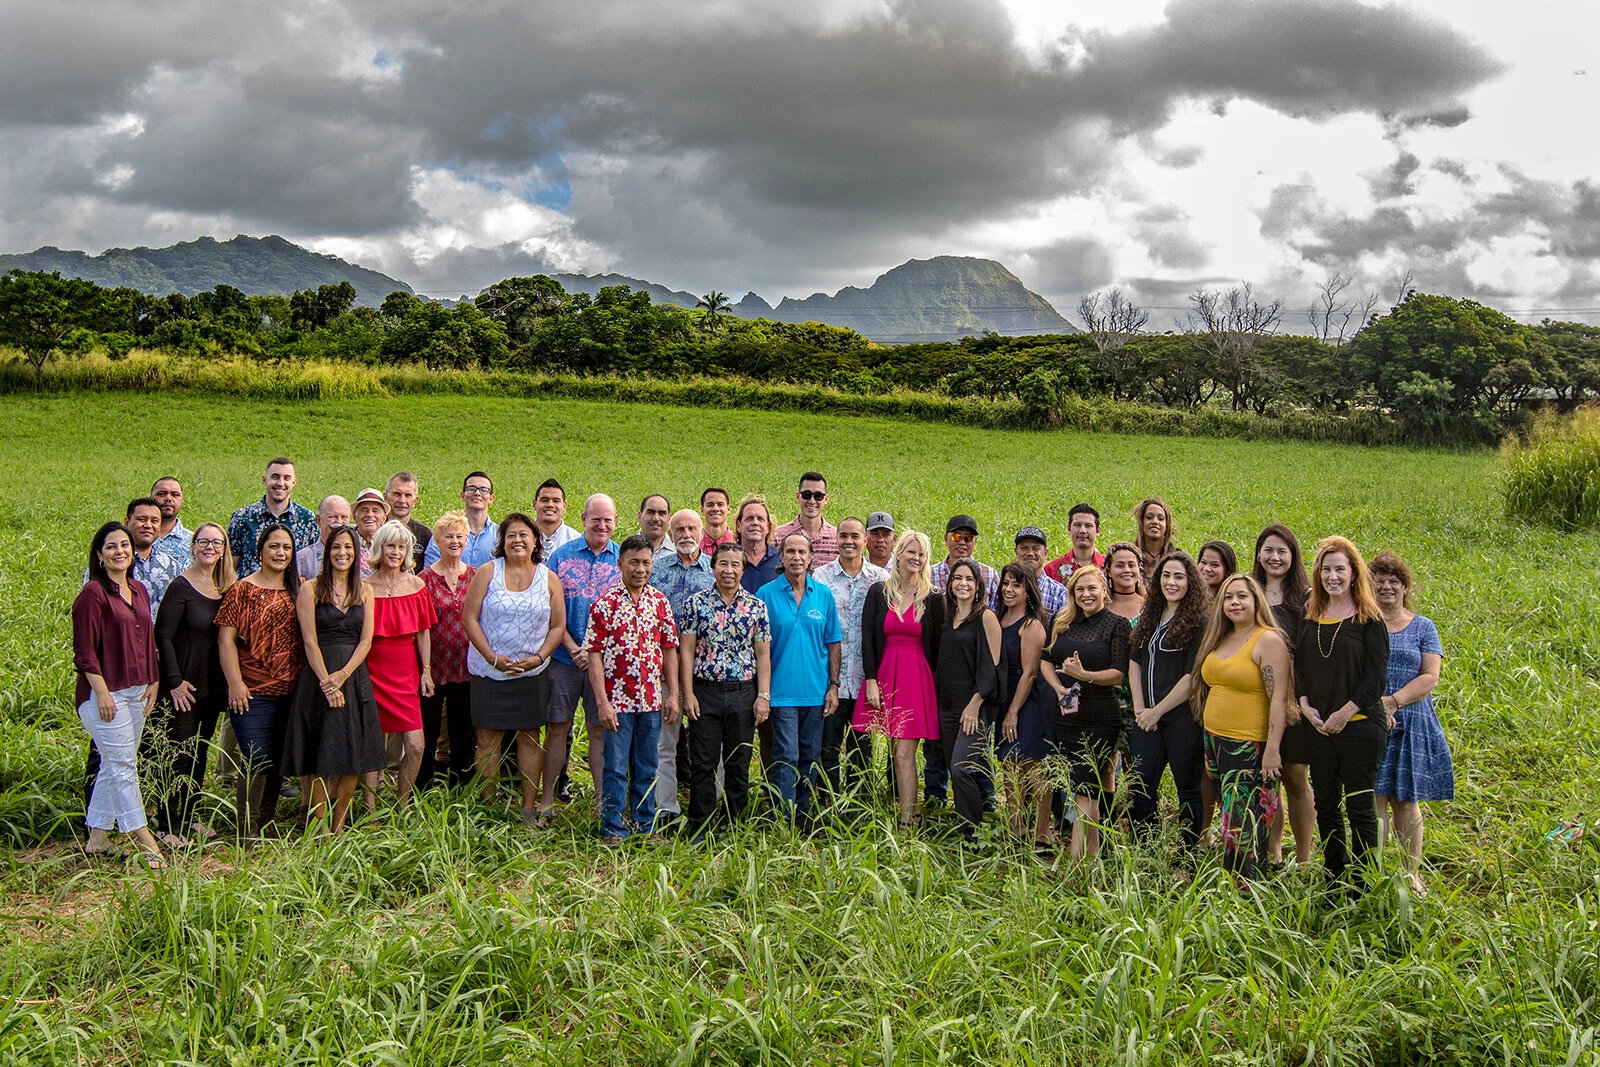  Kōloa Rum Company was founded to create superior Hawaiian rums using locally-sourced ingredients. In doing so, the company provides meaningful employment opportunities for the people of Kauaʻi, while diversifying our local economy and preserving imp